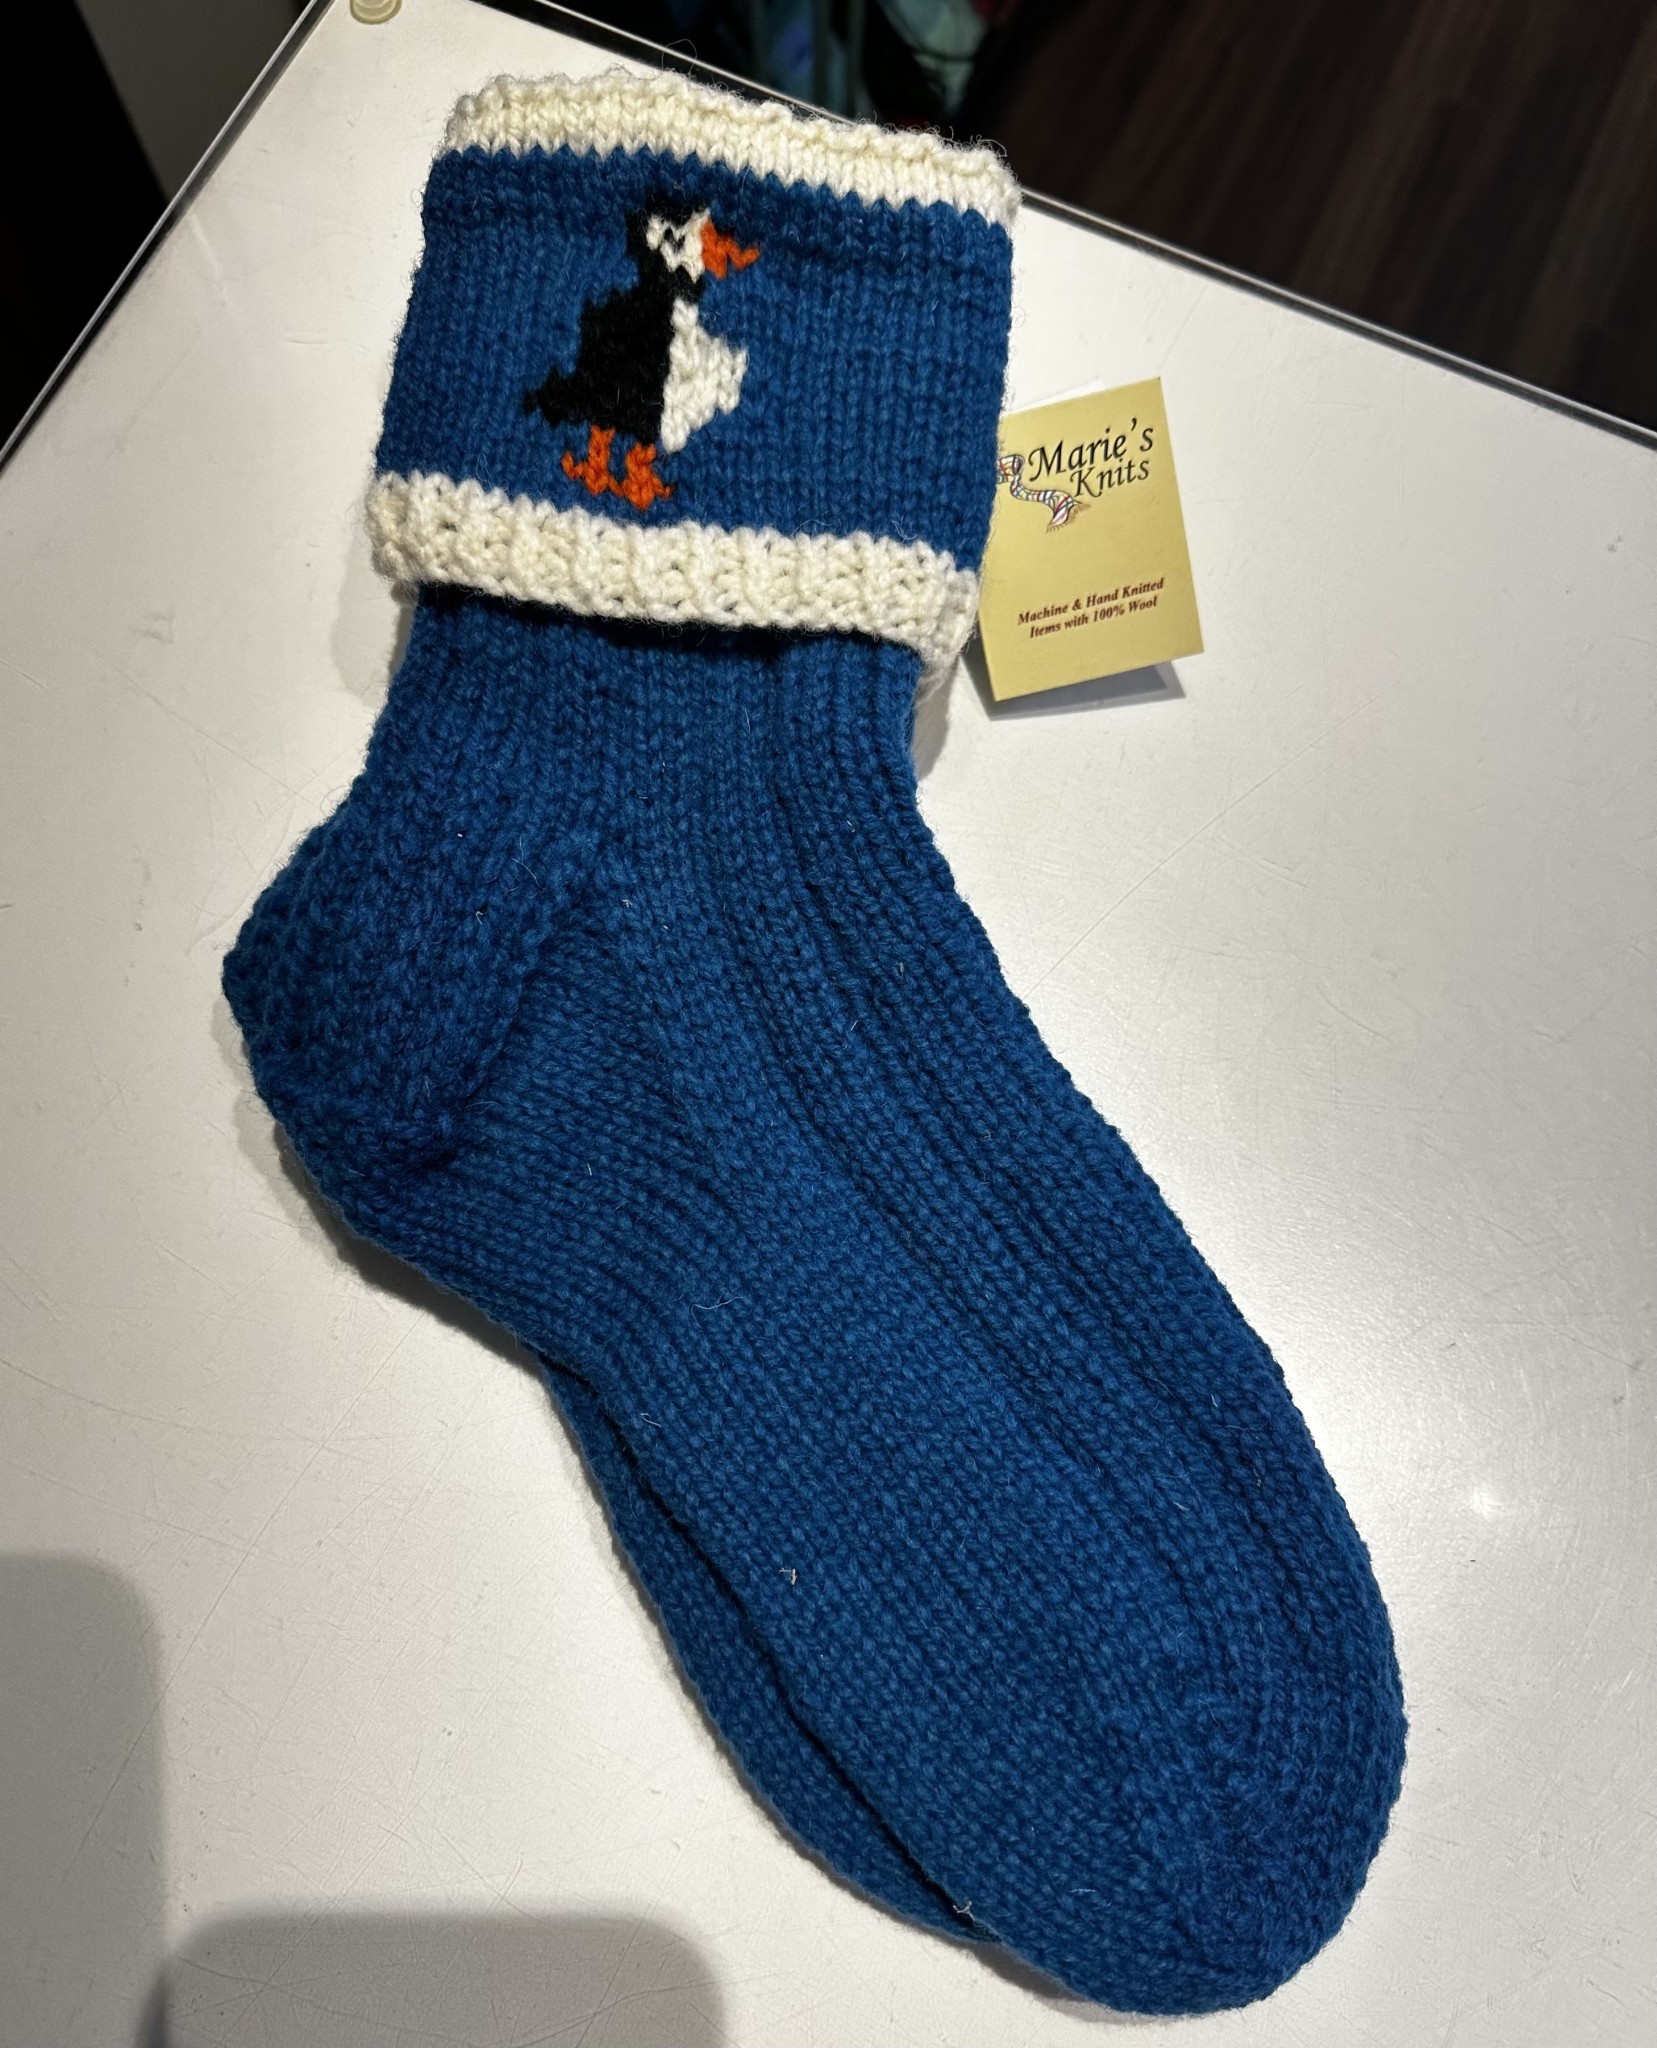 Marie’s Knits (Blue Puffin Socks)